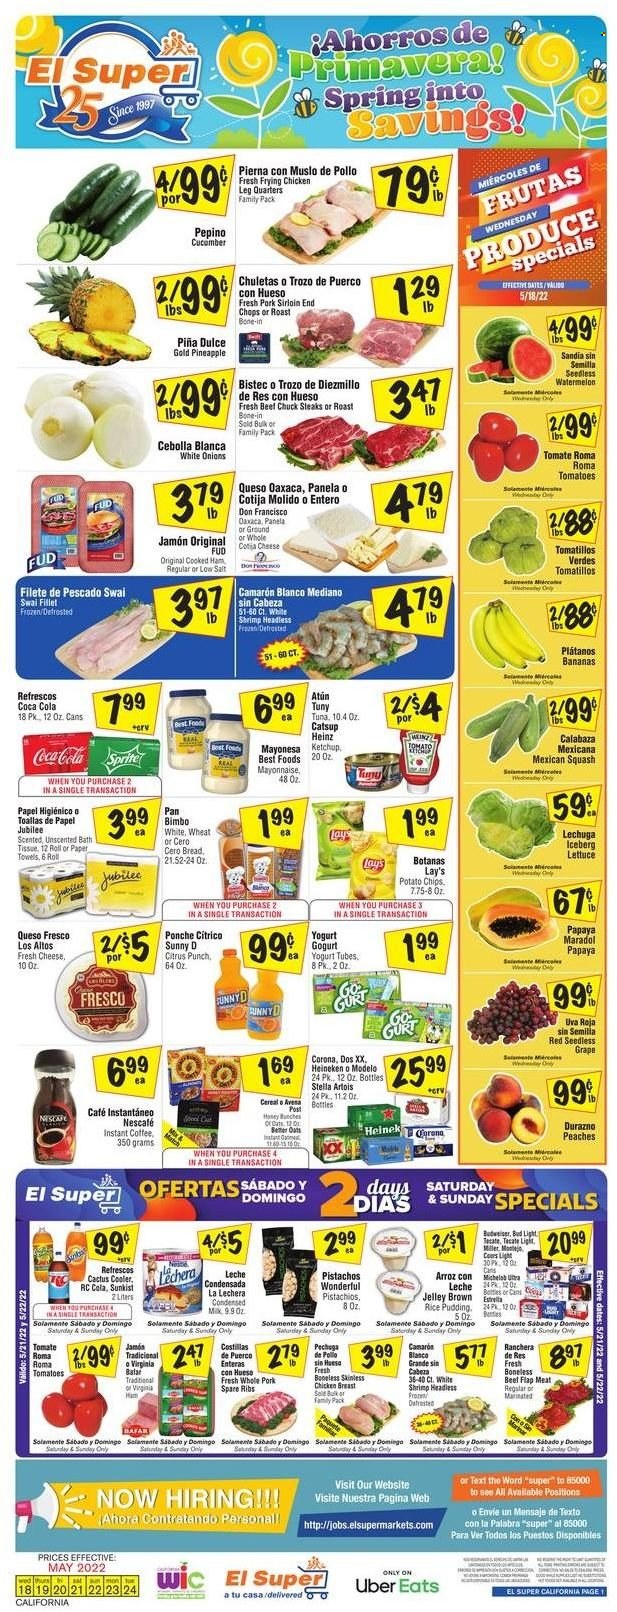 thumbnail - El Super Flyer - 05/18/2022 - 05/24/2022 - Sales products - tomatillo, tomatoes, lettuce, mexican squash, bananas, watermelon, pineapple, papaya, shrimps, swai fillet, cooked ham, ham, queso fresco, cheese, yoghurt, rice pudding, potato chips, Lay’s, oats, Heinz, cereals, ketchup, pistachios, Coca-Cola, fruit punch, instant coffee, Nescafé, beer, Bud Light, Corona Extra, Heineken, Modelo, chicken breasts, chicken legs, steak, pork meat, pork ribs, pork spare ribs, Stella Artois, Coors, Michelob, peaches. Page 1.